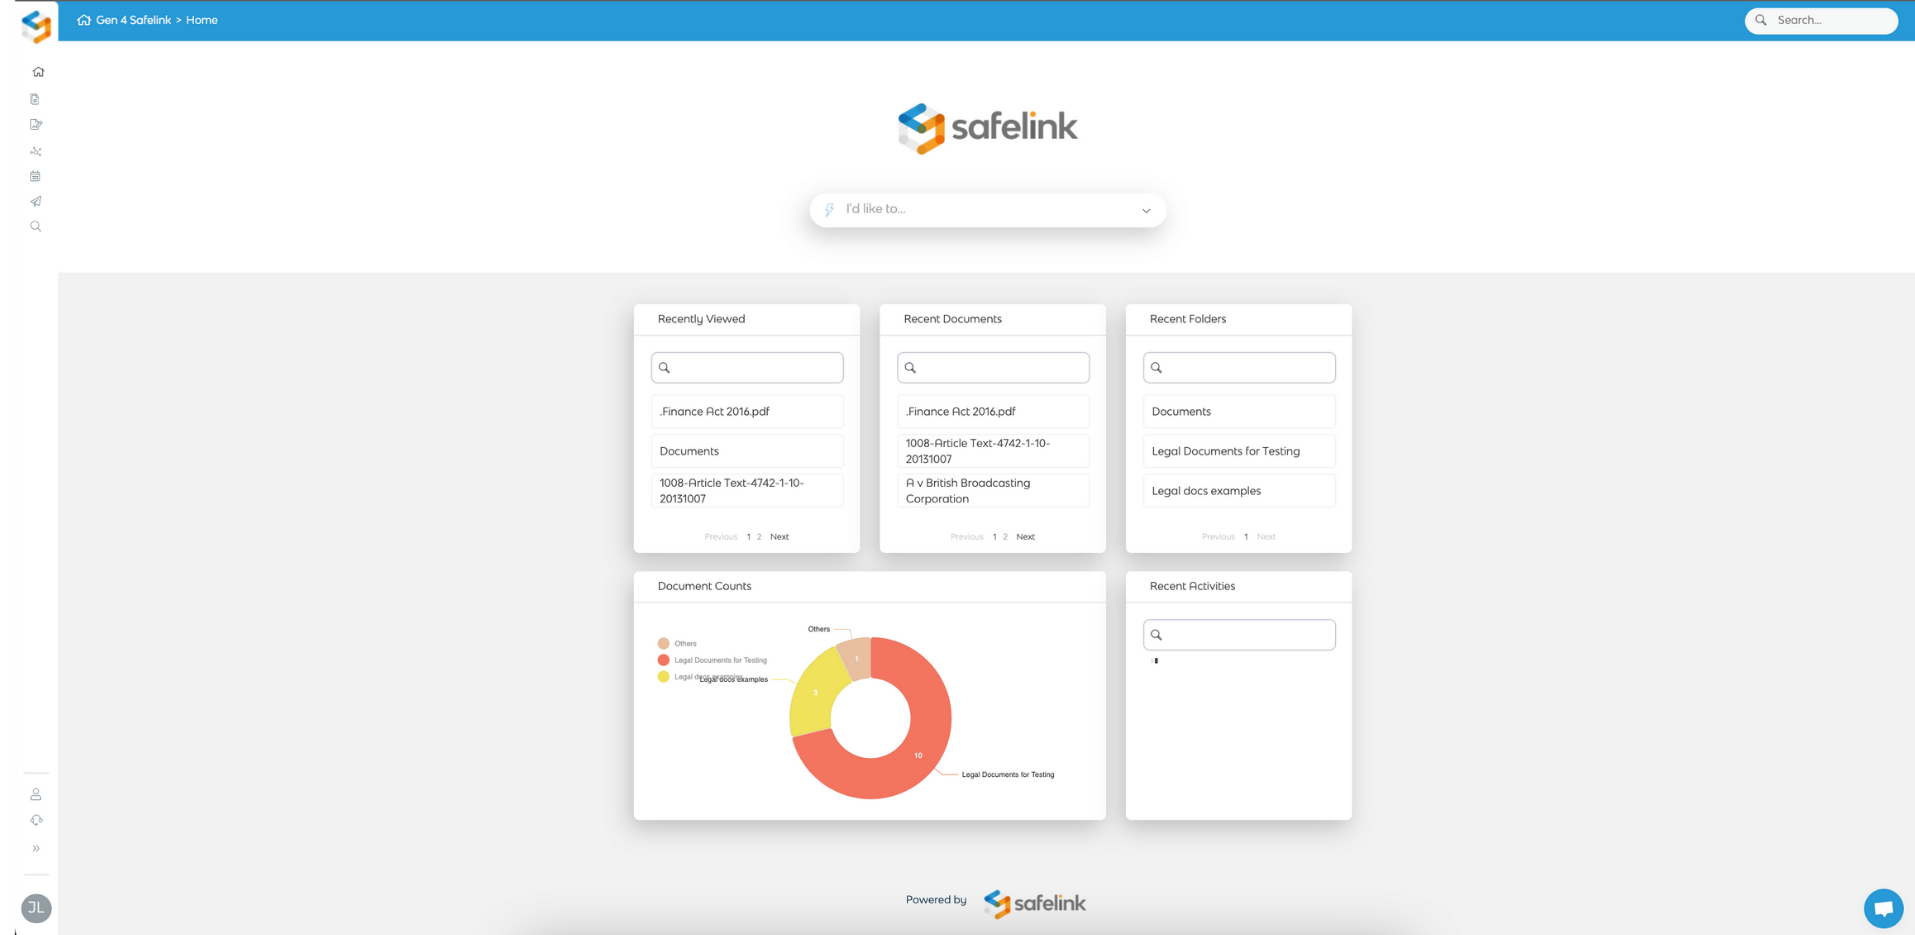 Safelink Homepage (Expanded View)